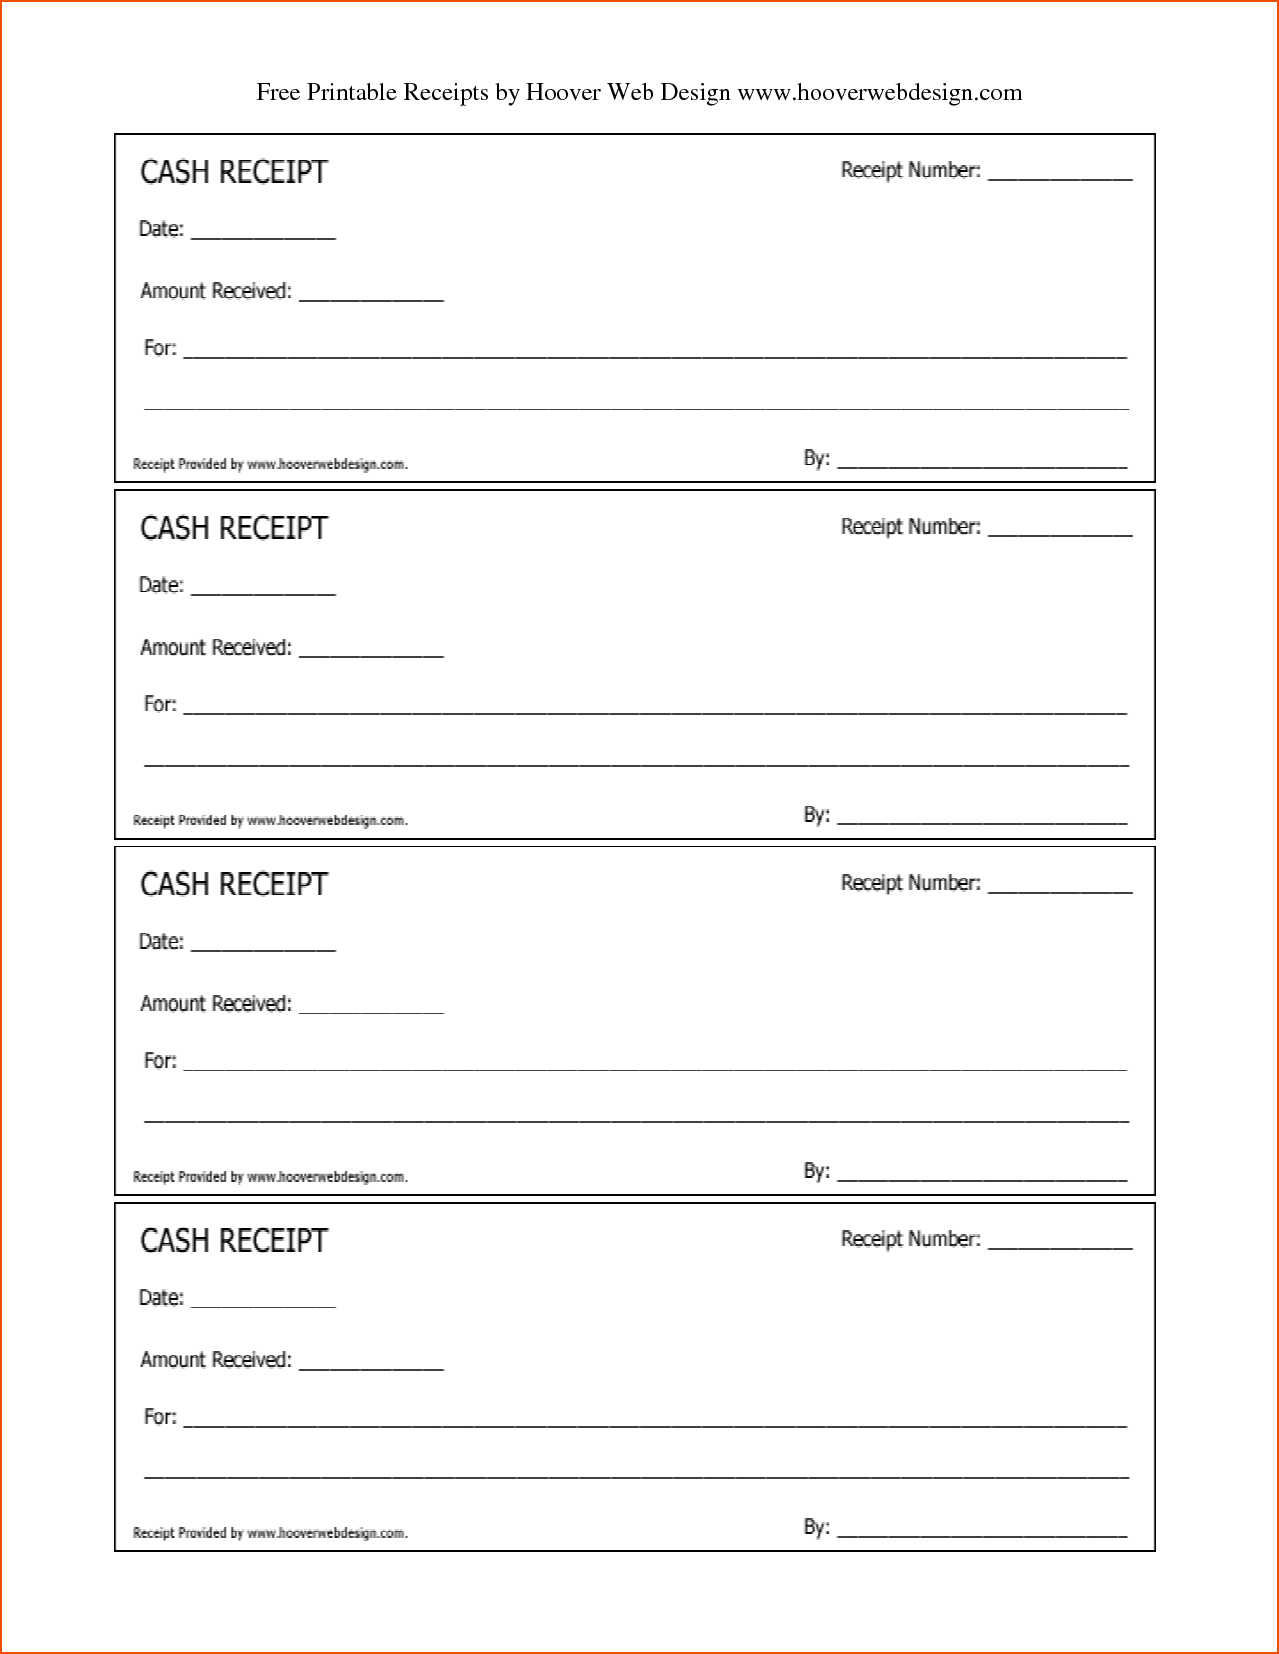 Free Printable Receipts For Services Feedback Templates Personal - Free Printable Receipt Template